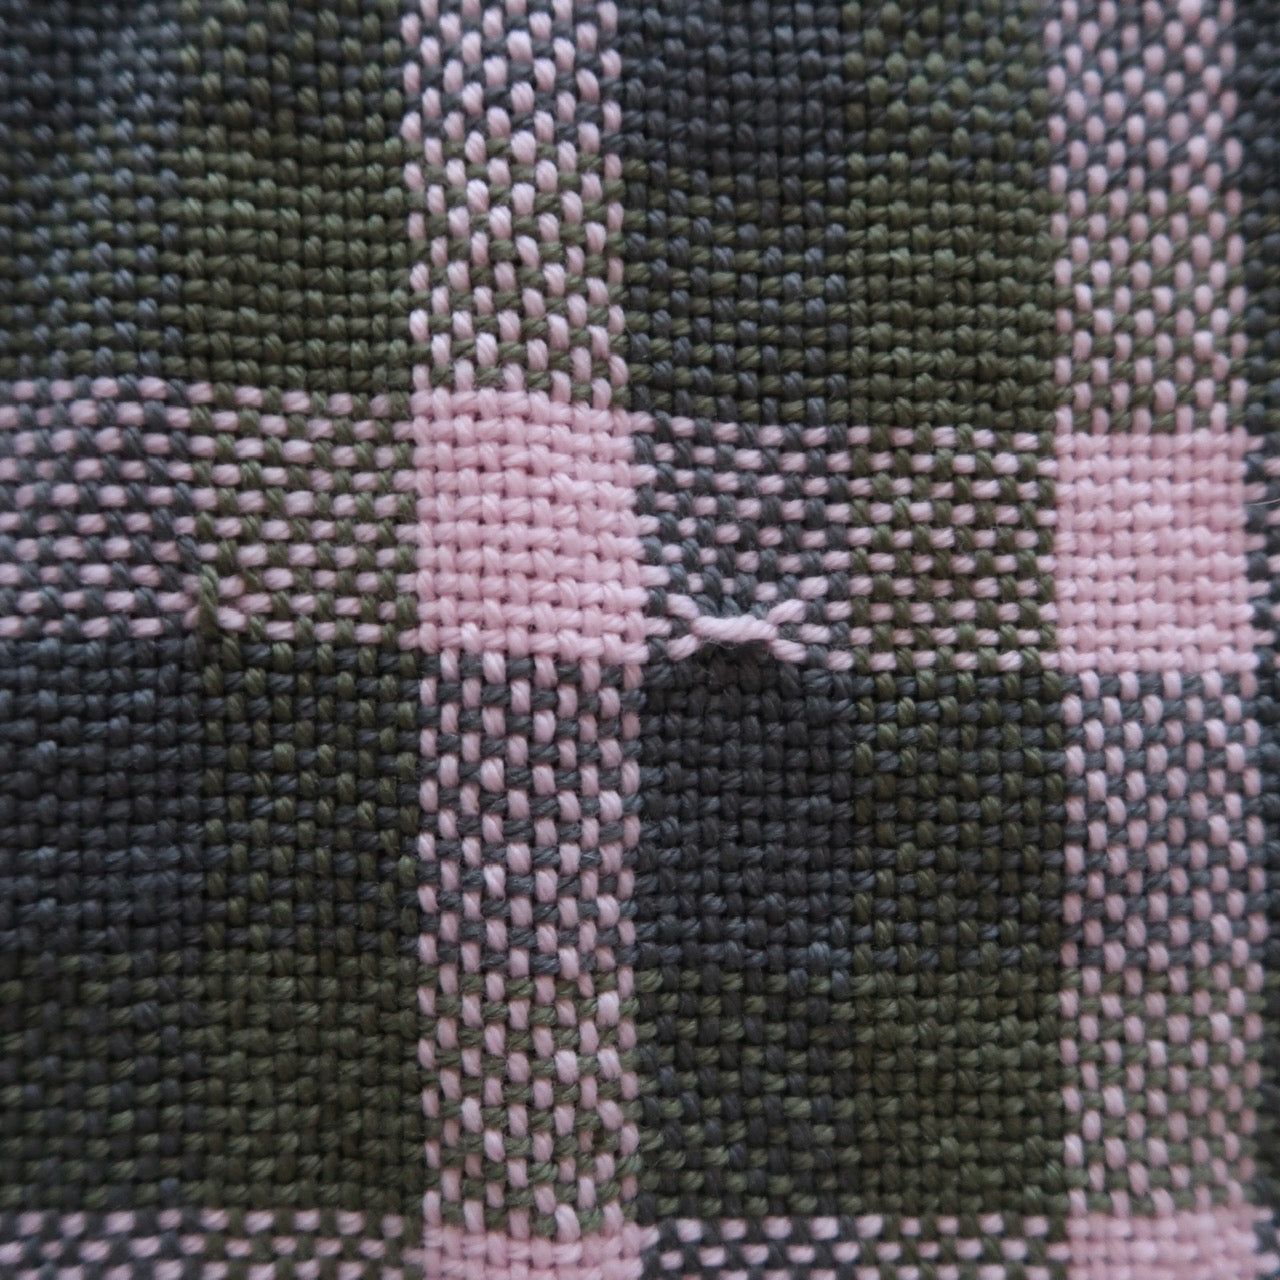 Pink Green Plaid Handwoven Wool Scarf (studio second)